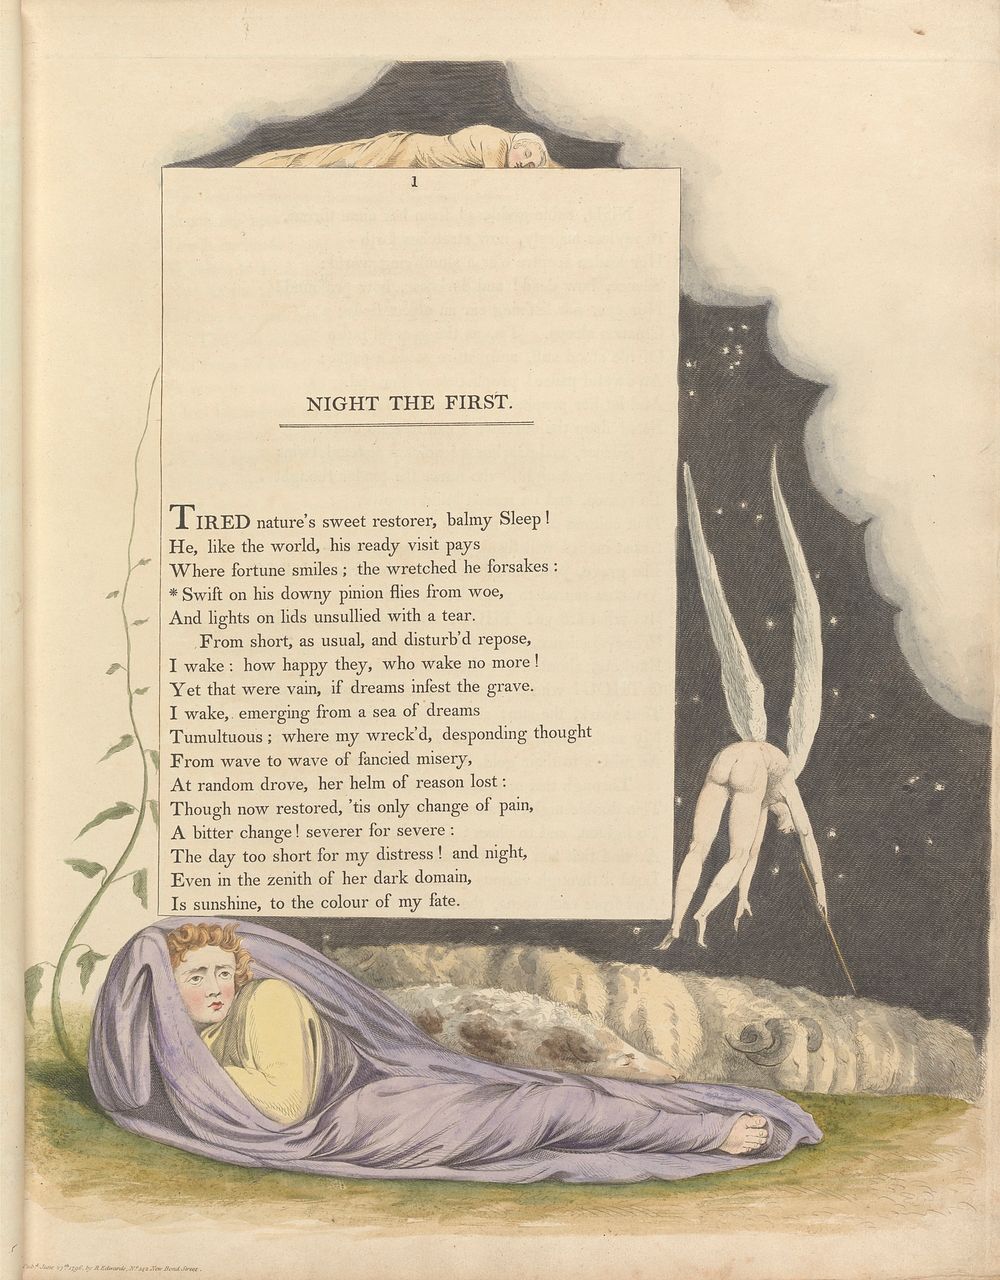 Young's Night Thoughts, Page 1, "Swift on His Downy Pinion Flies from Woe" by William Blake.